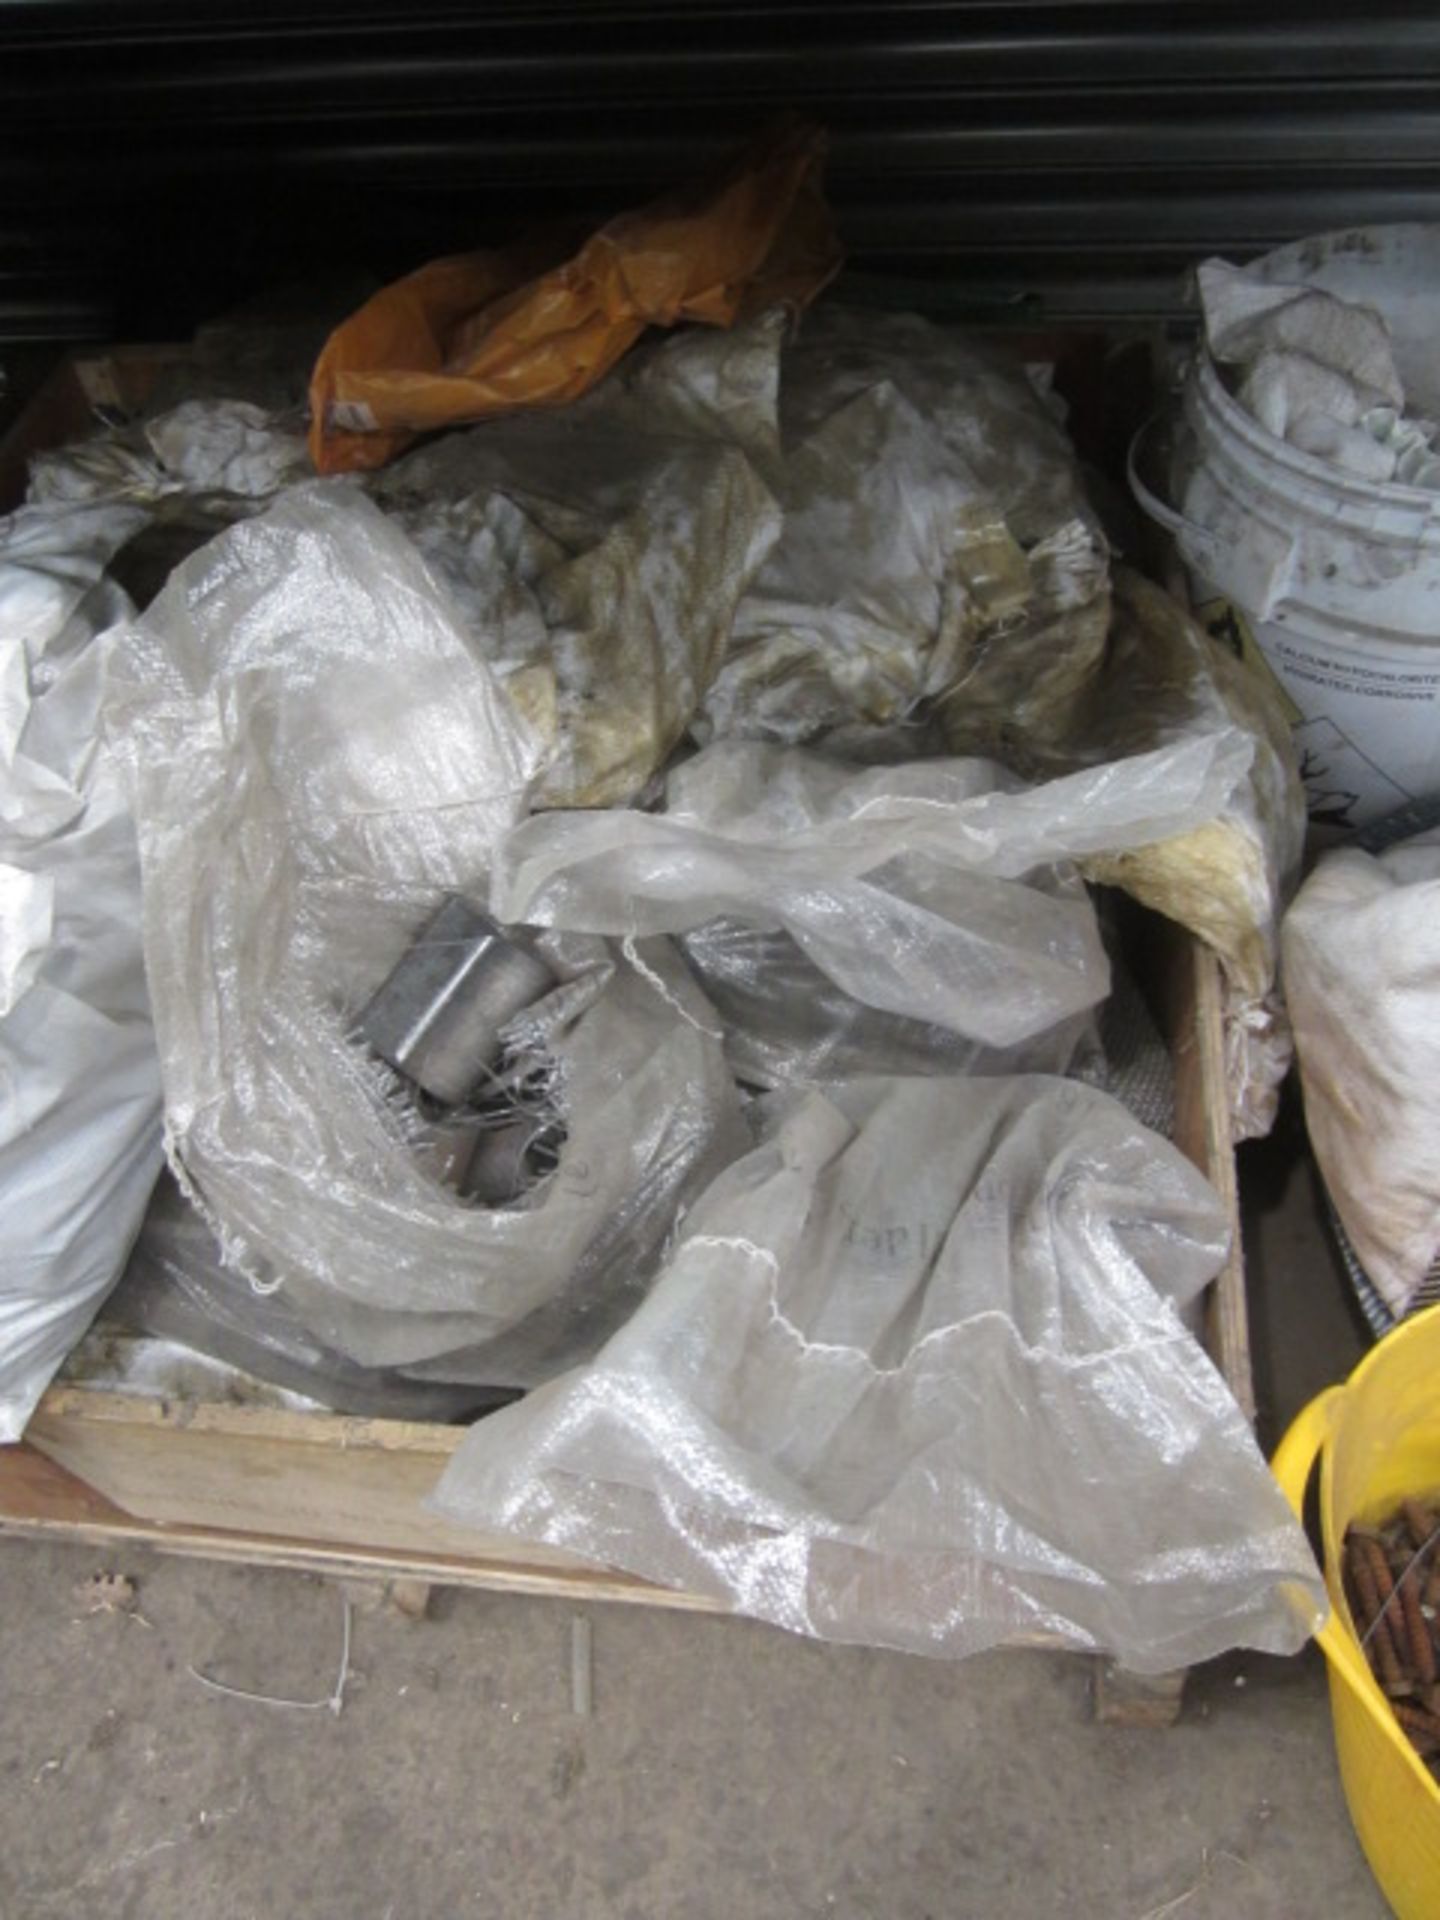 Contents of bay of racking including steel profiles, heavy duty bolts, metal clips etc., as lotted - - Image 16 of 19